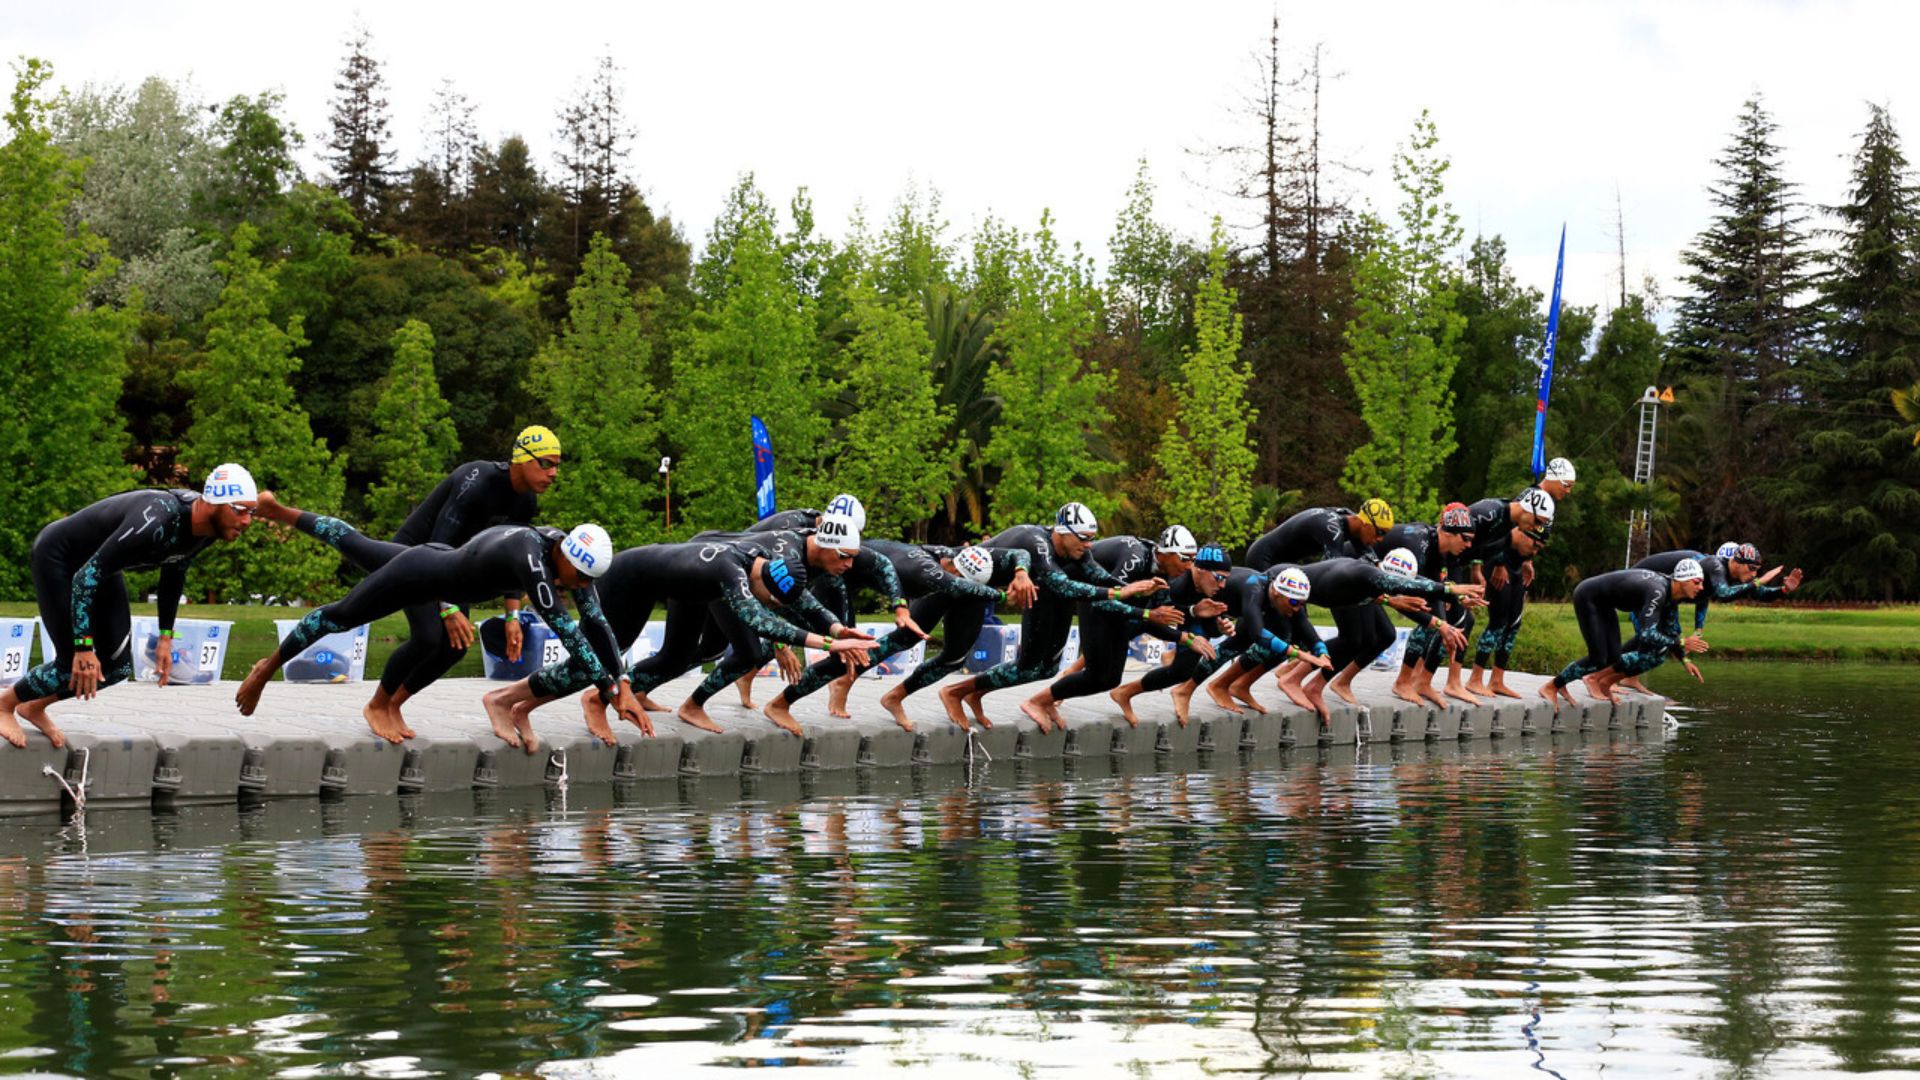 United States Takes Gold in Open Water Swimming